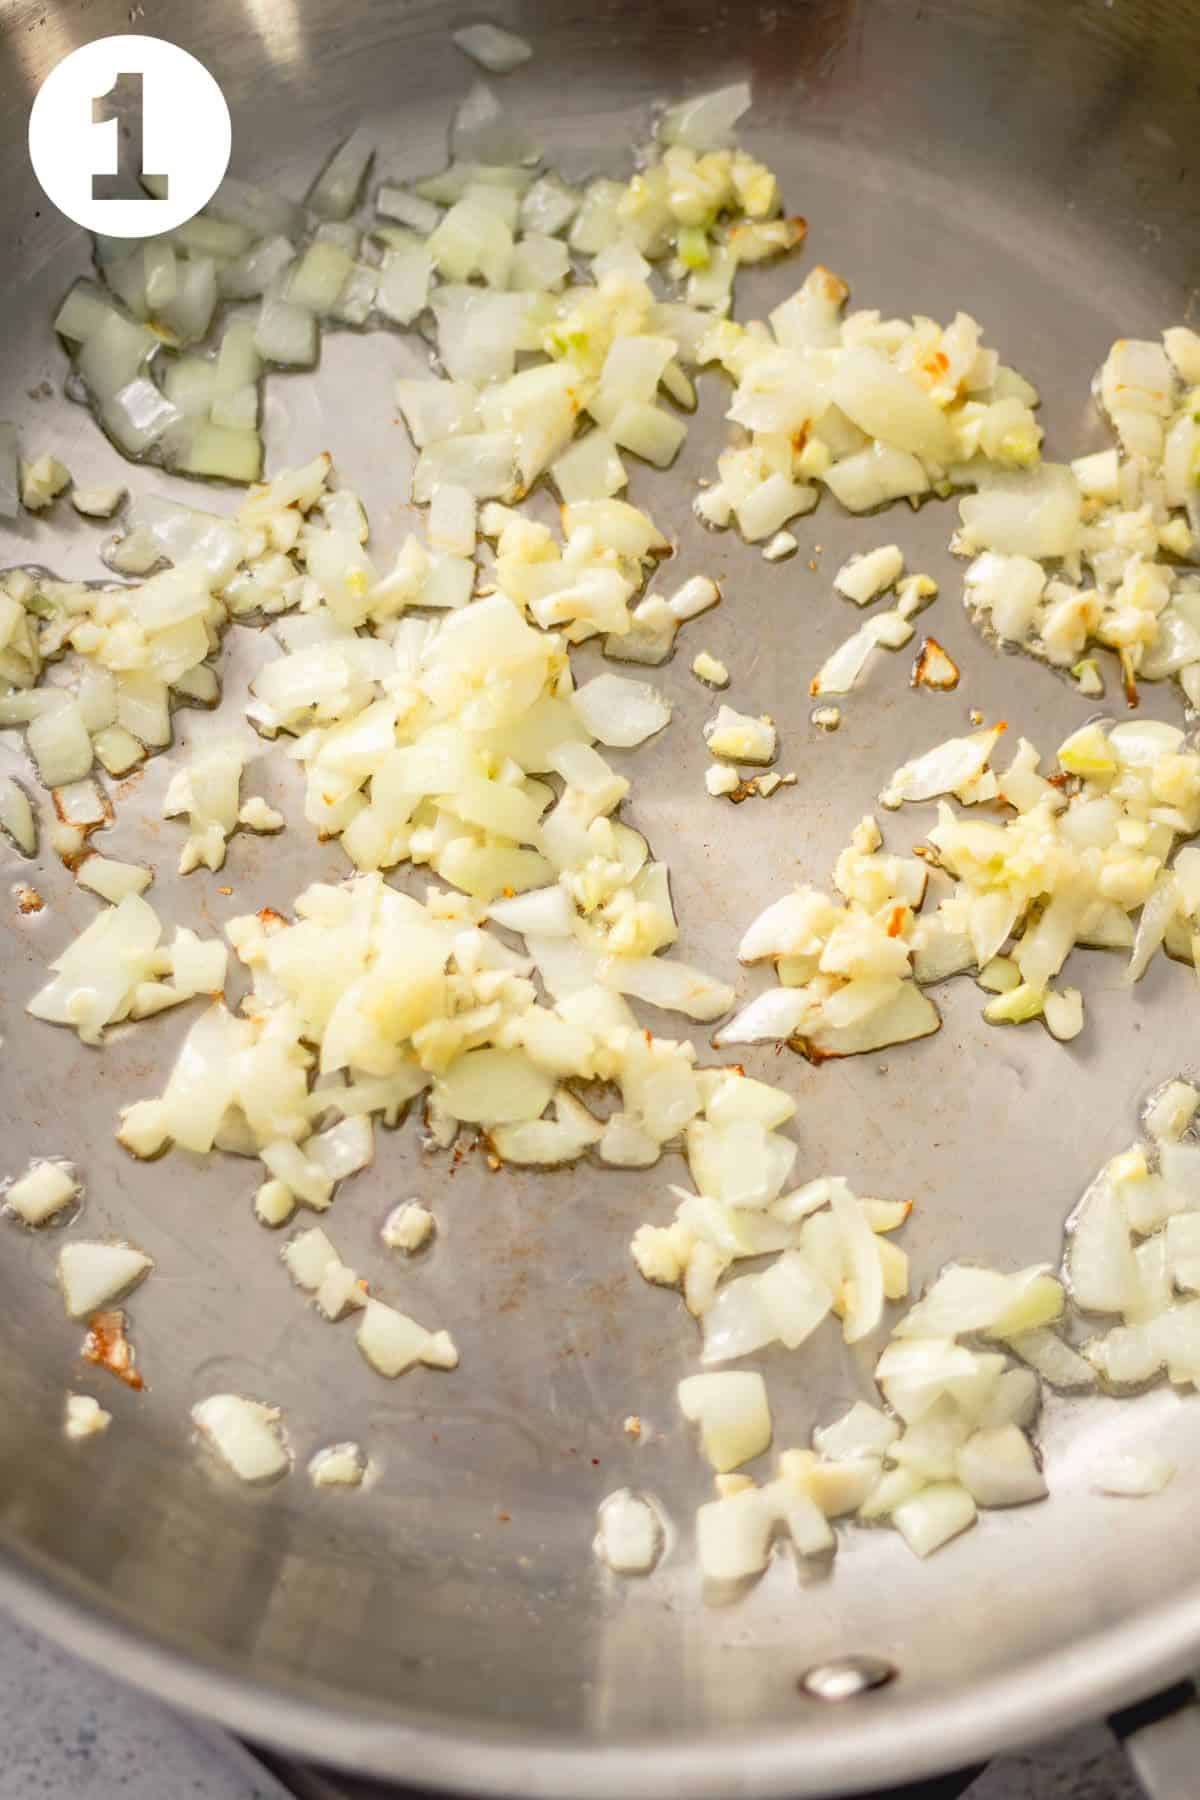 Diced onion and minced garlic cooking in a large skillet.